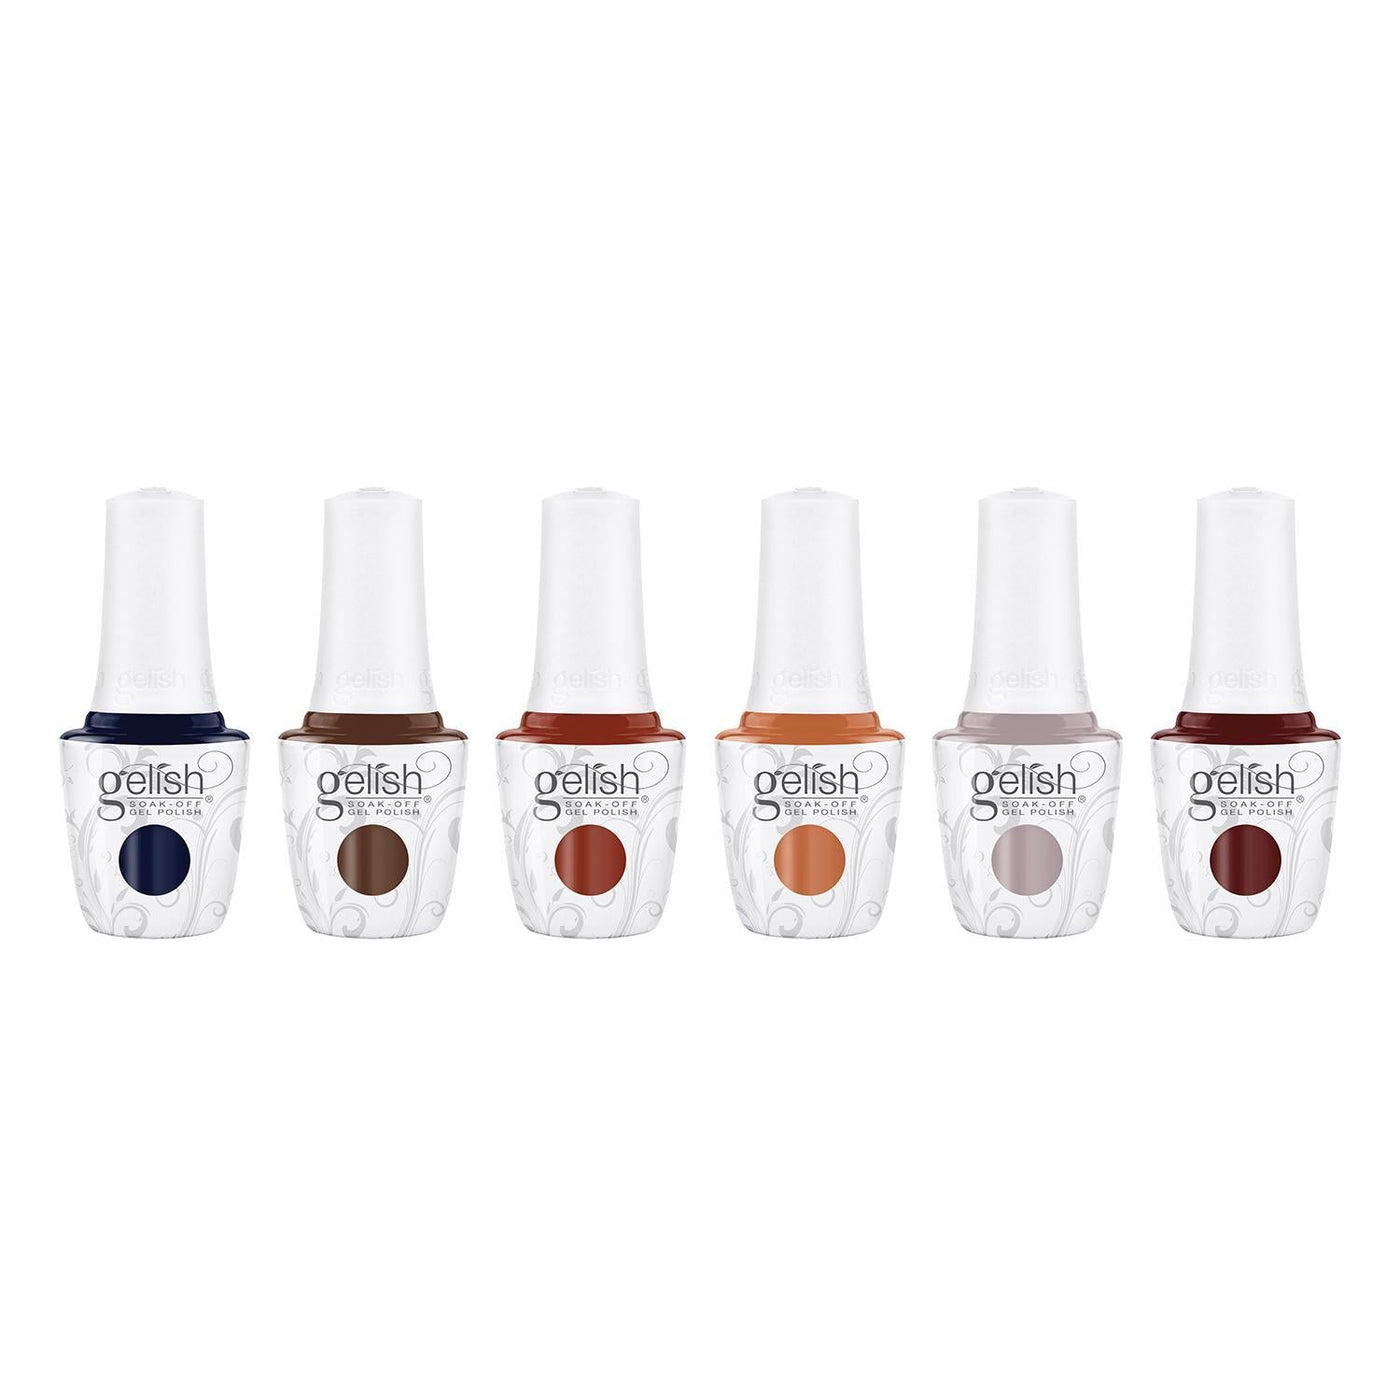 Gelish No Boundaries Collection (6 x 15ml) Afternoon Escape, a burnt orange crème, and Catch Me If You Can, a pumpkin crème. Uncharted Territory, a garnet crème, and Totally Trailblazing, a hot chocolate crème. Navy blue crème, Laying Low, and the taupe crème, Keep ‘Em Guessing.